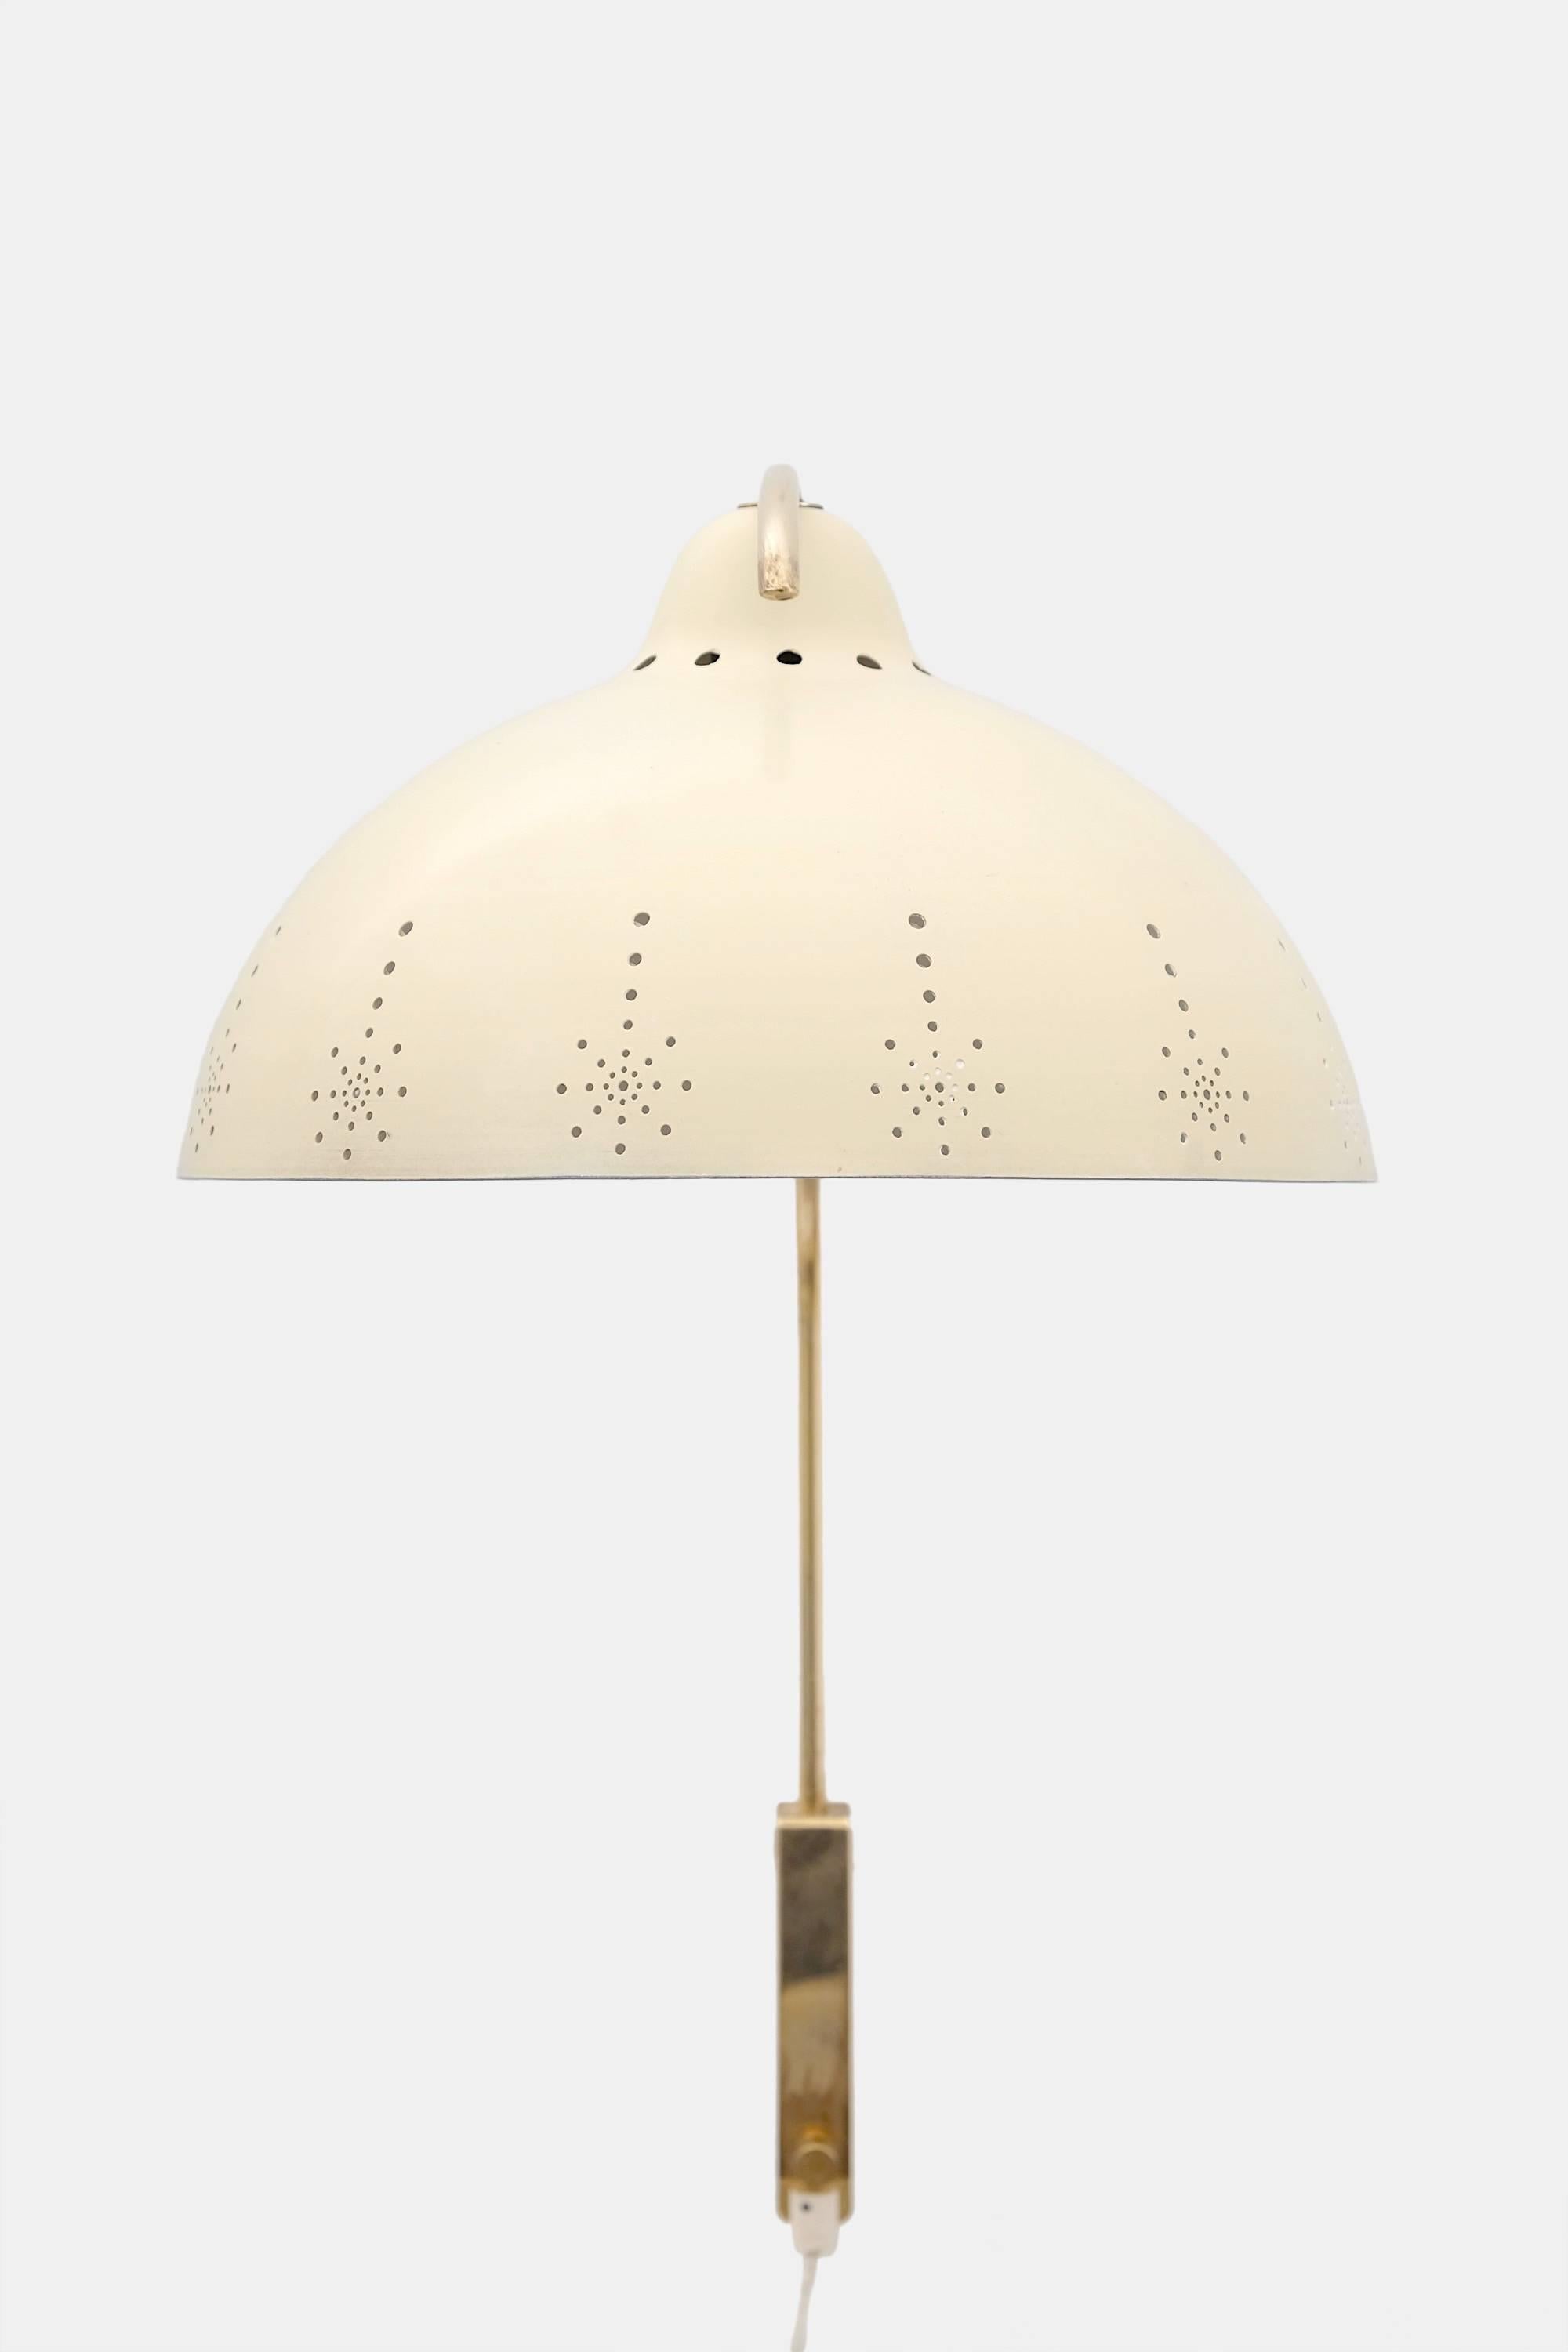 Elegant 1950s brass wall lamp by Valinte Oy, Finland. Brass stem and perforated aluminum shade which is painted cream color. Stem can be turned sideways and adjusted up and down. Light switch in the electric wire. Measure: Overall depth of the lamp